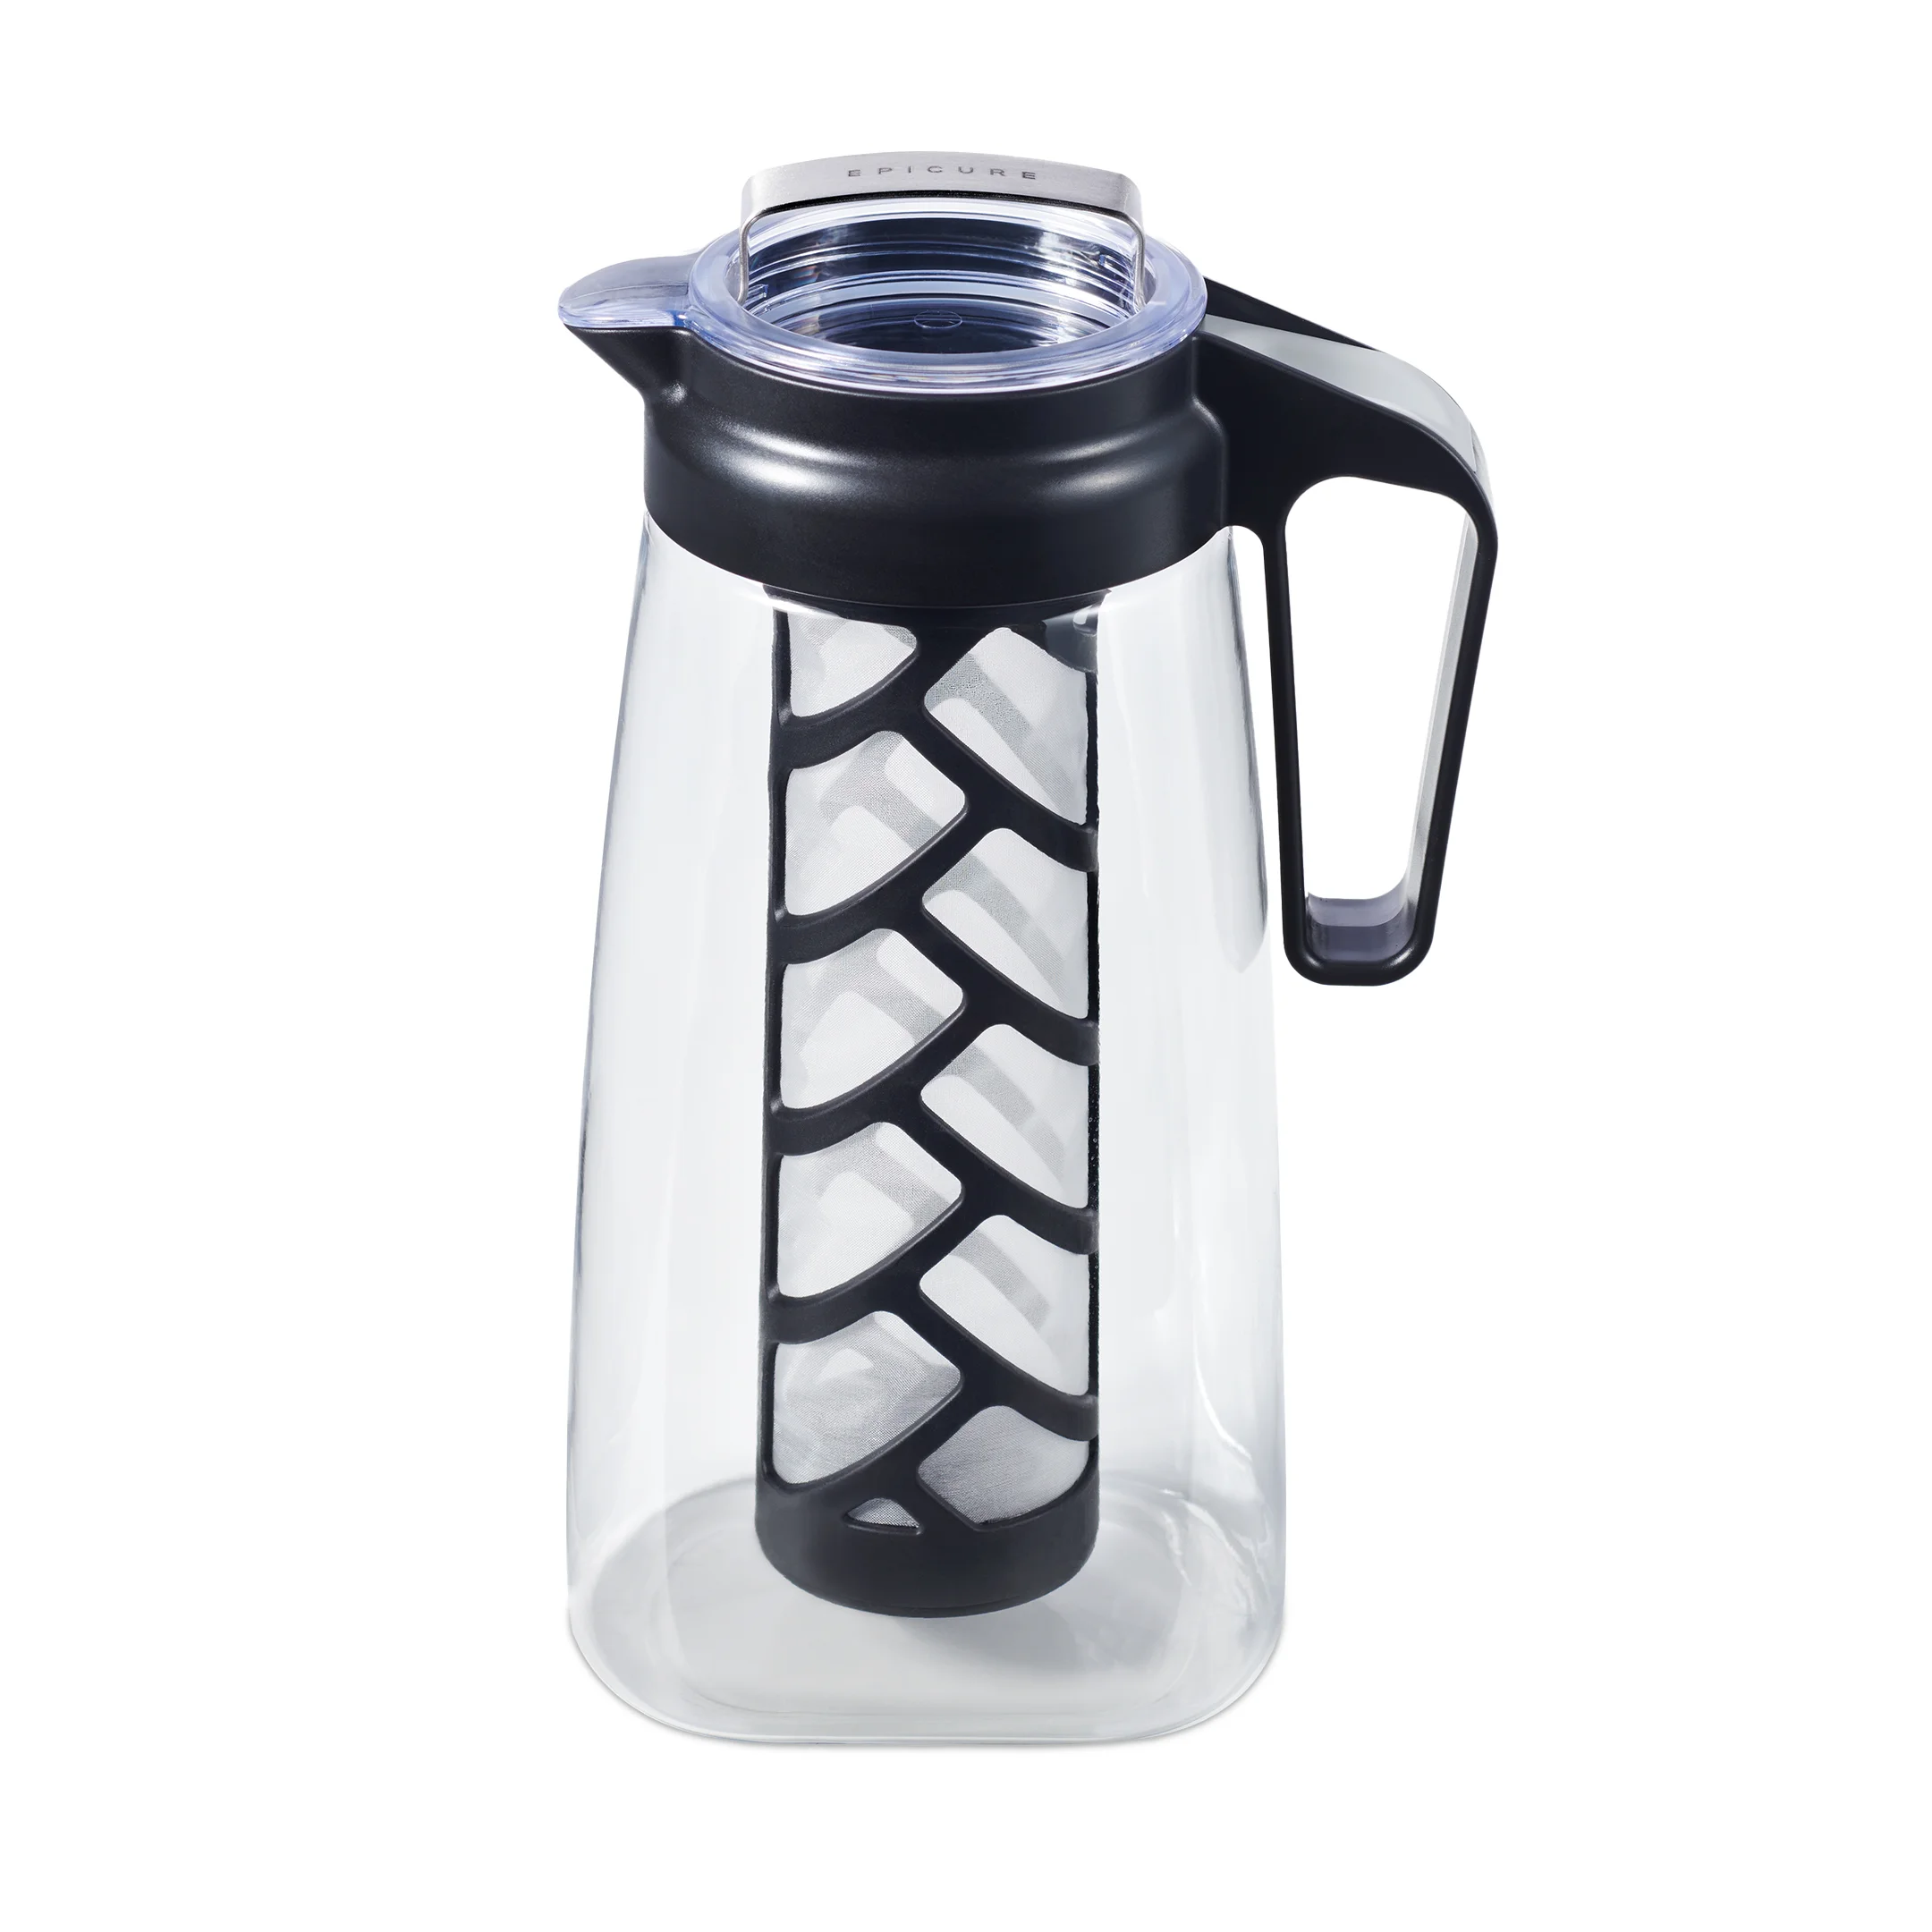 Stay Cool Iced Tea Pitcher 